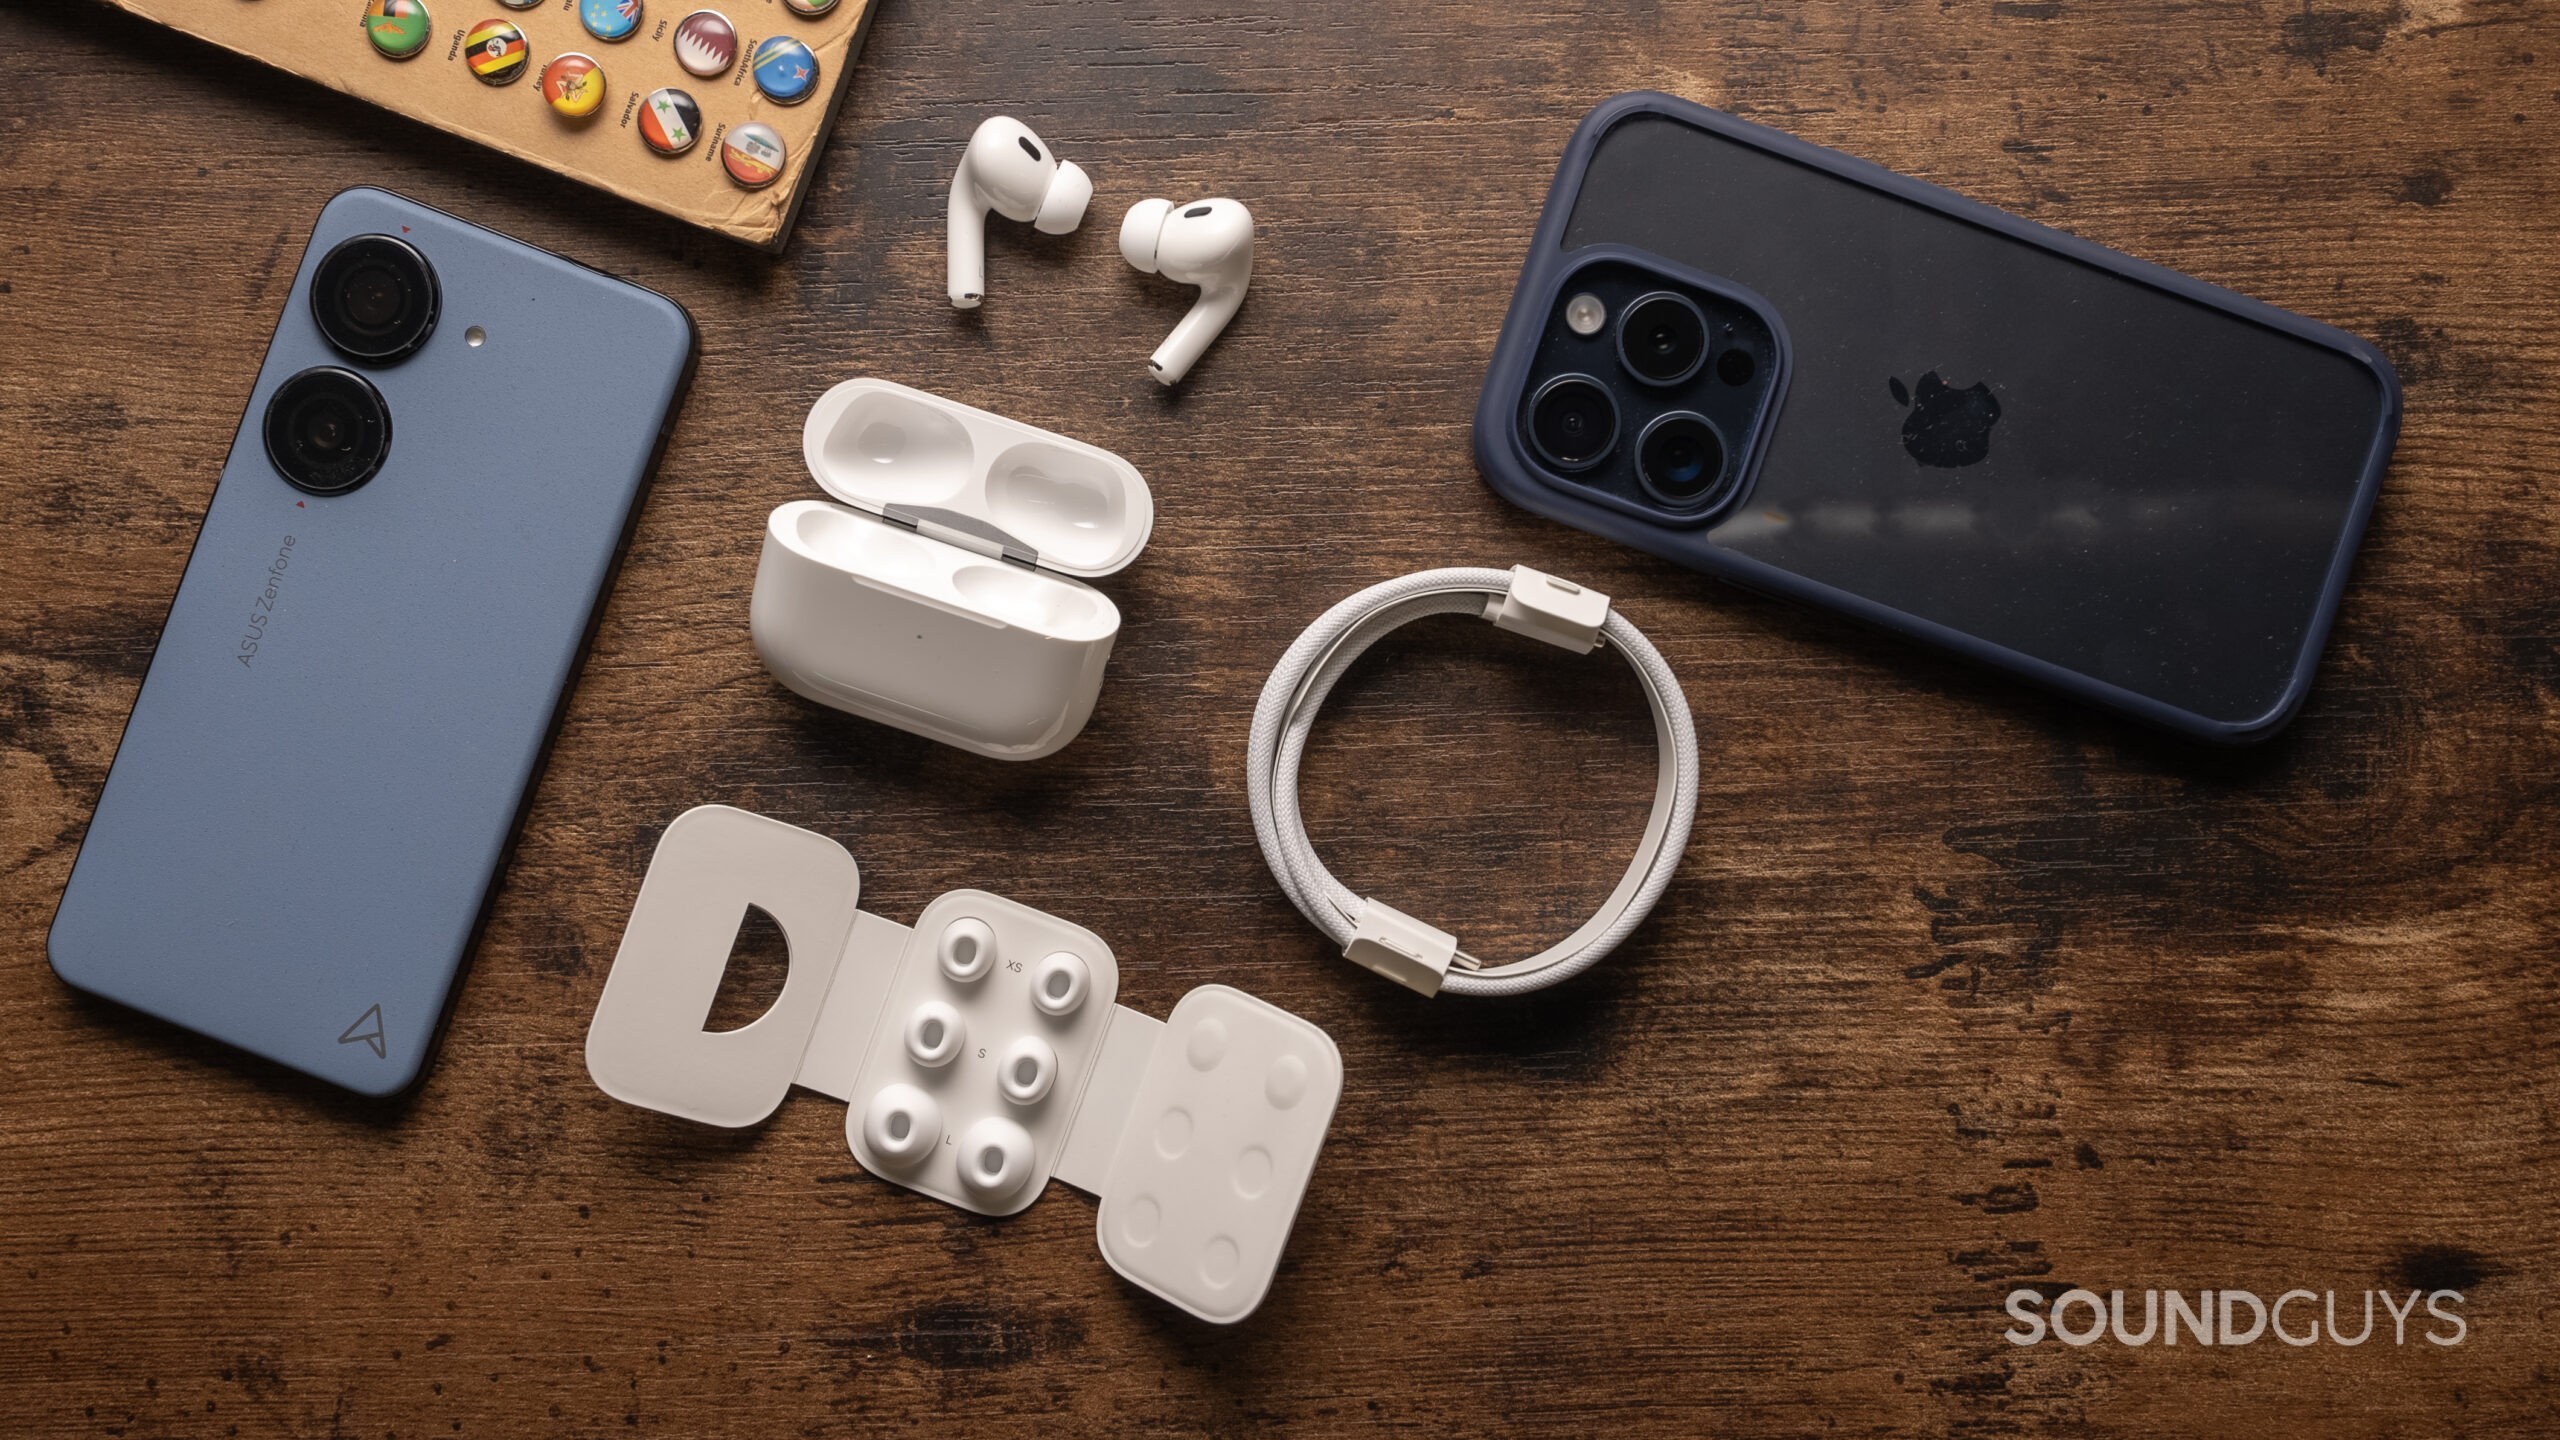 Protect AirPods Pro 2 with a durable case and strap